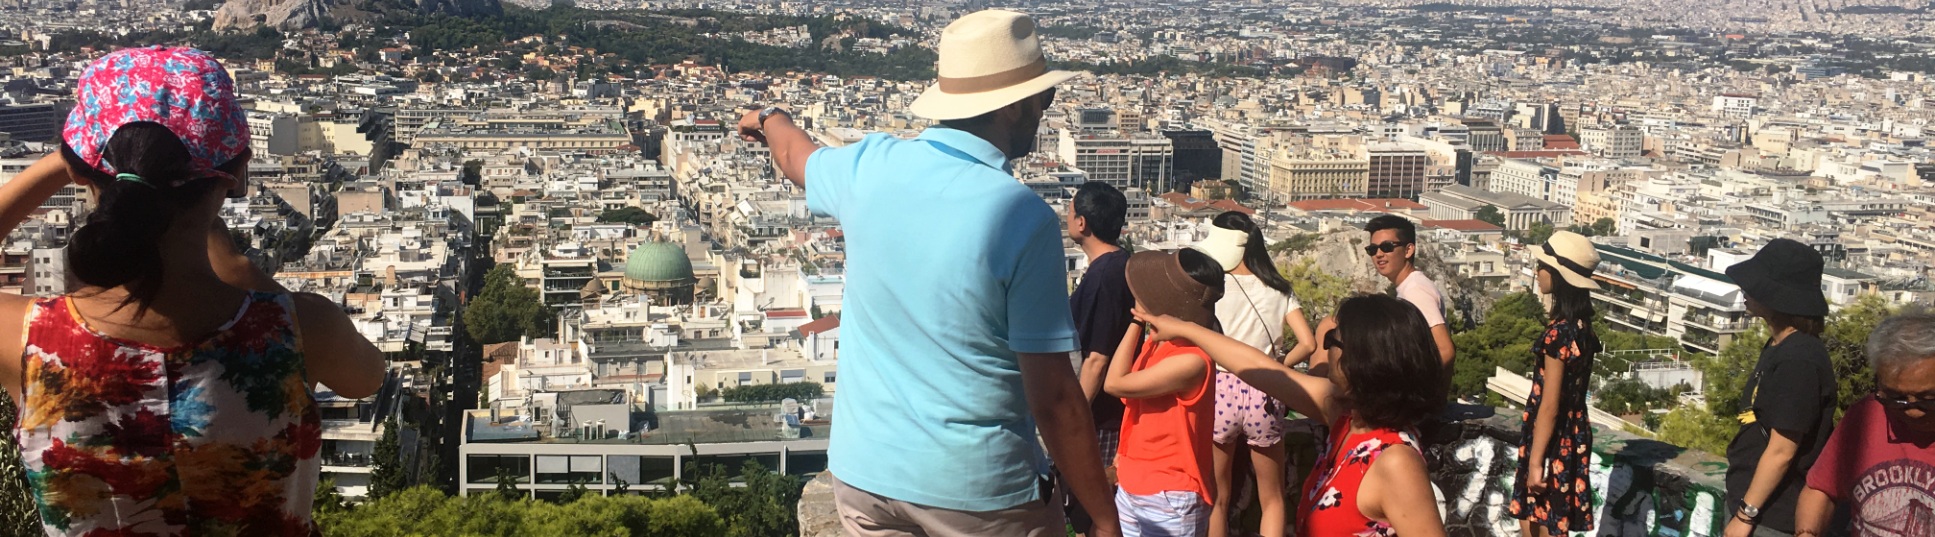 Best Athens Tours is the top Athens tours service provider